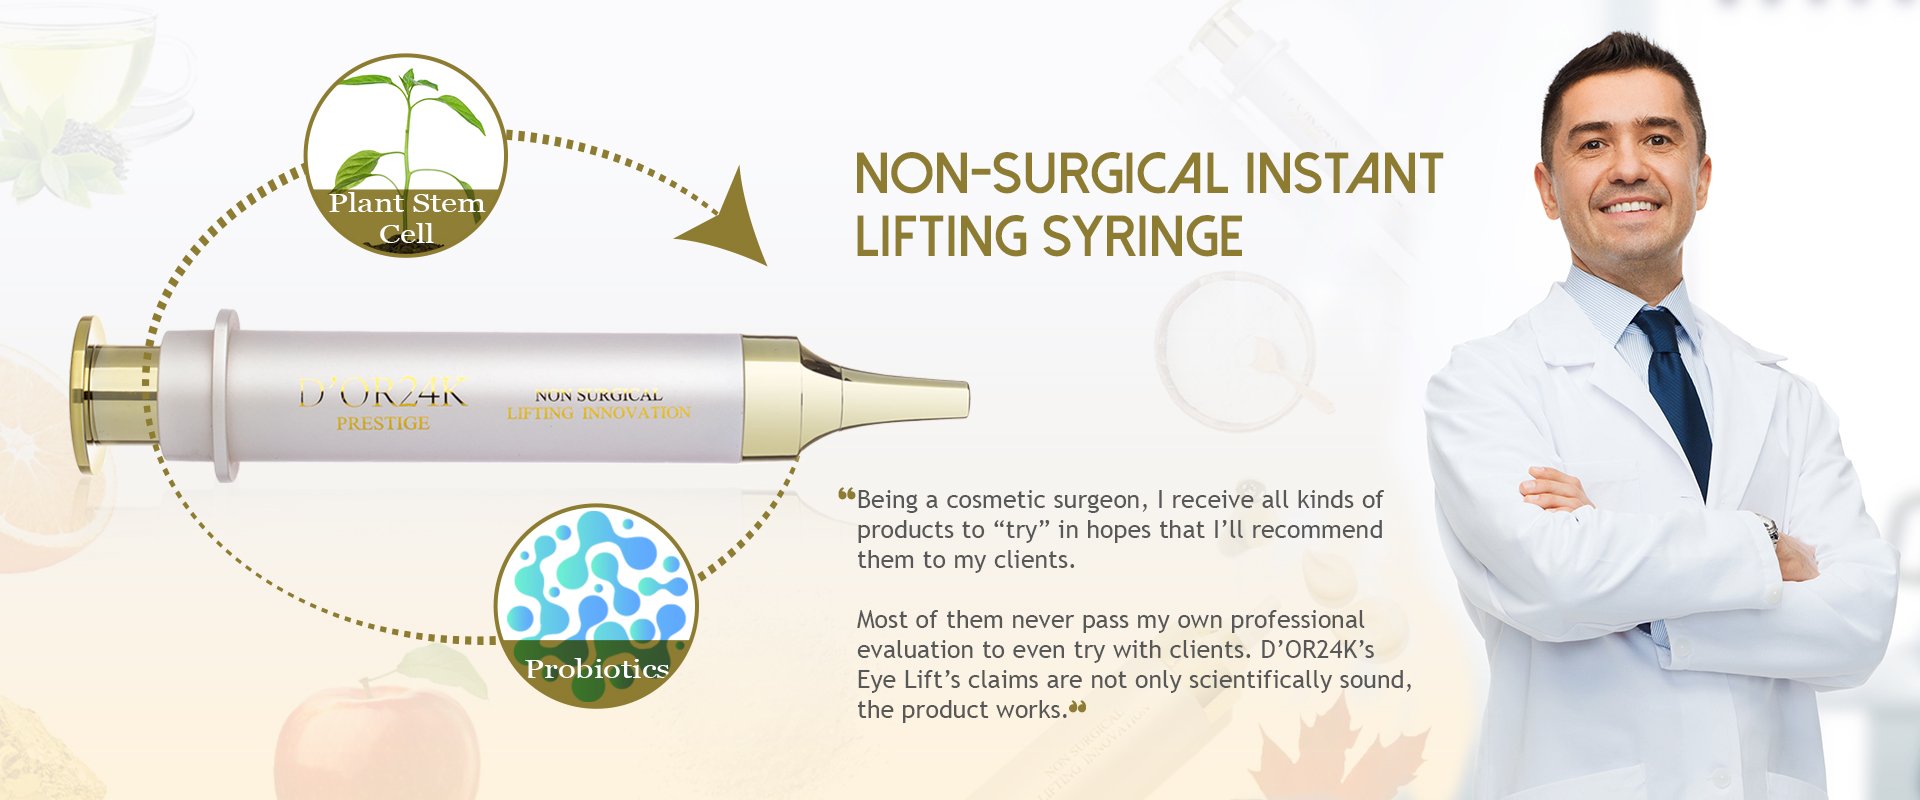 Non-surgical Instant Lifting Syringe